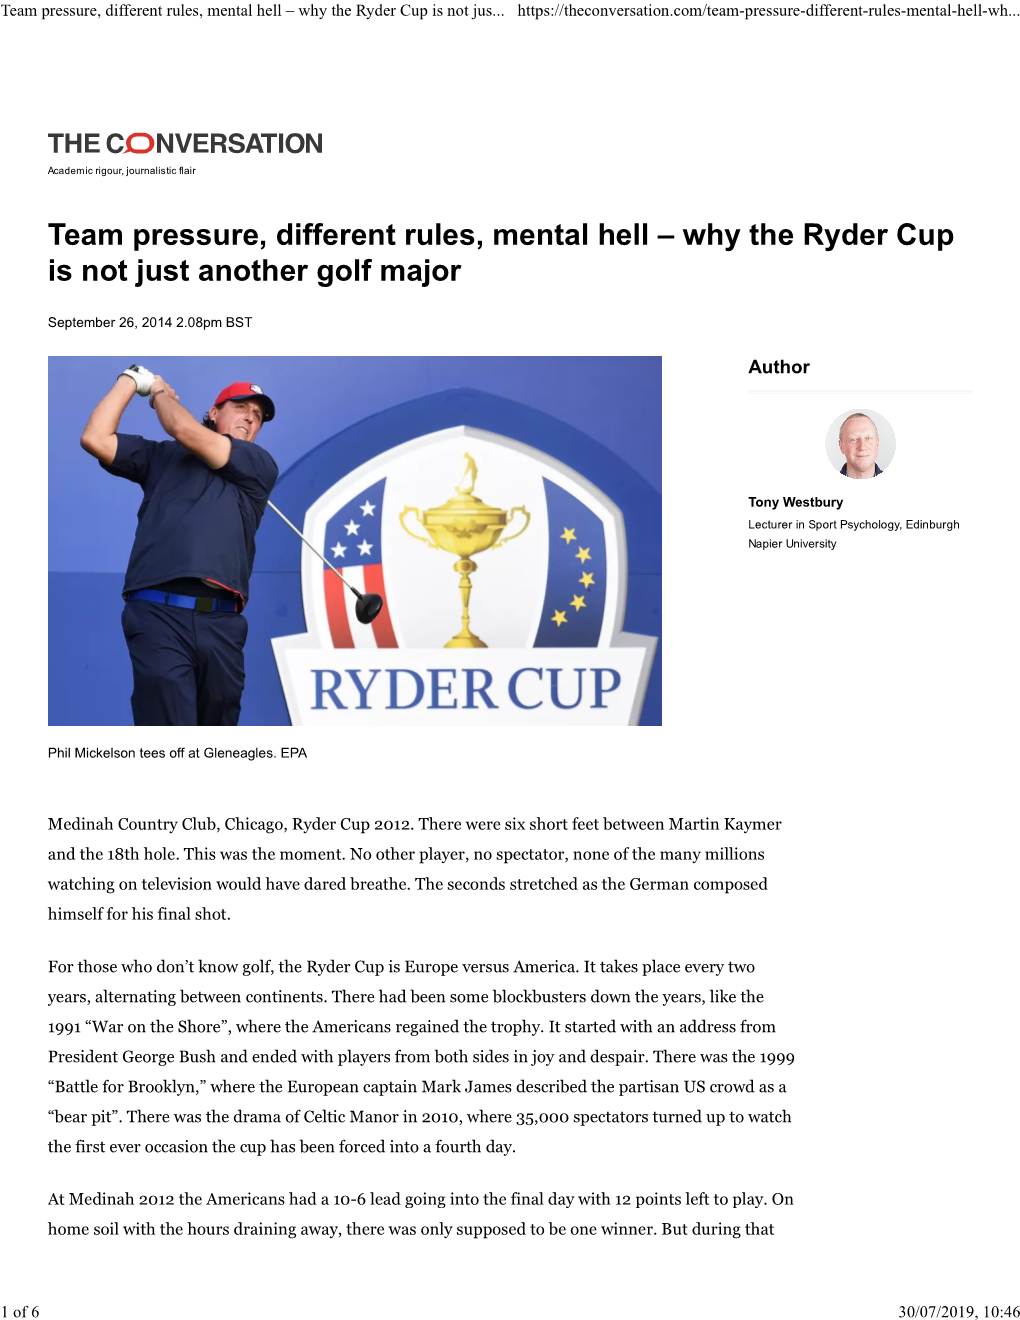 Team Pressure, Different Rules, Mental Hell – Why the Ryder Cup Is Not Jus